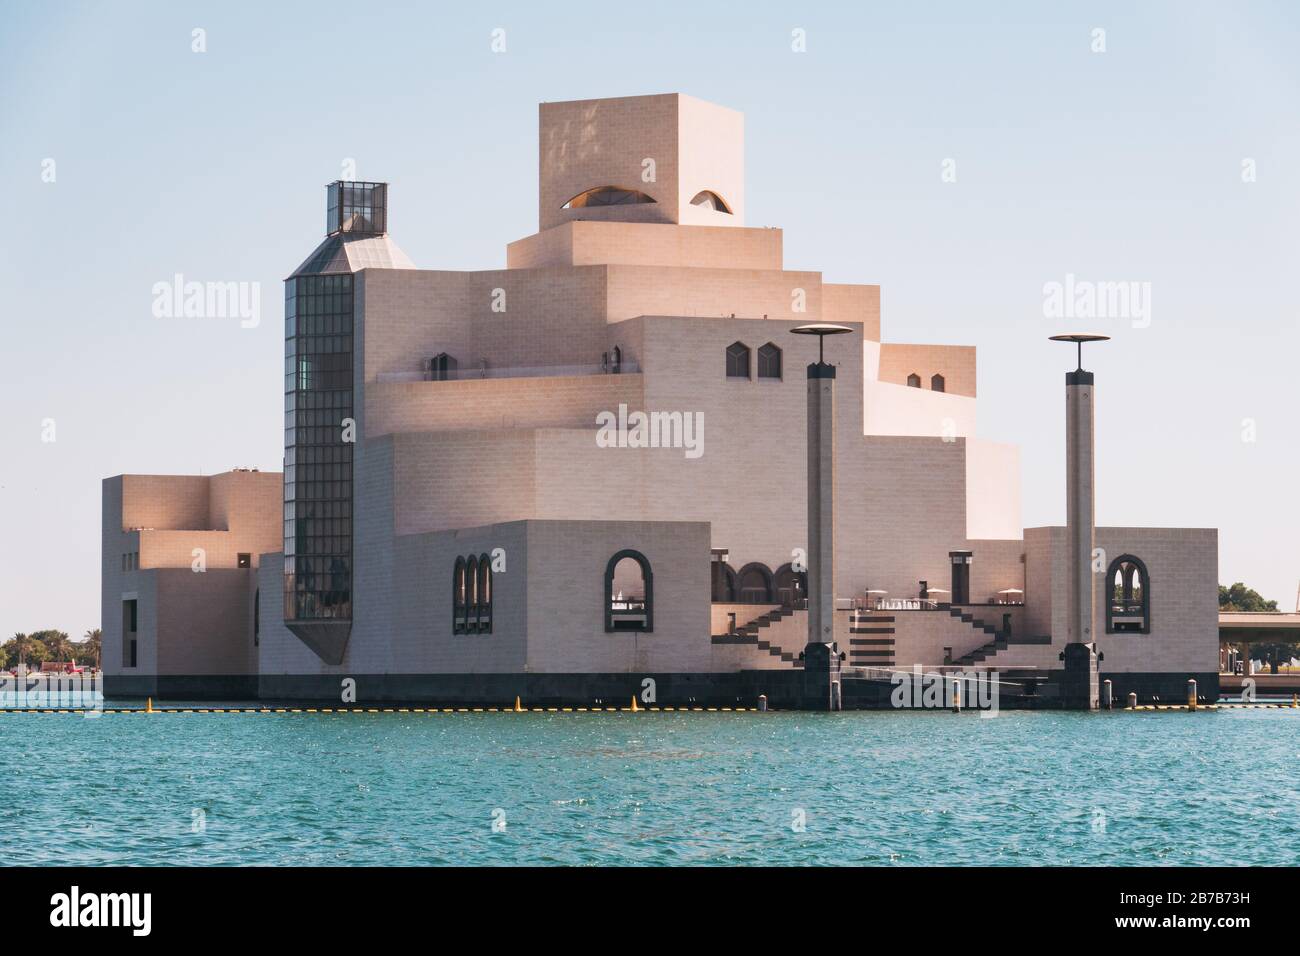 The cuboid shaped Museum of Islamic Art (MIA) building in Doha, Qatar. Designed by Chinese architect Ieoh Ming Pei Stock Photo